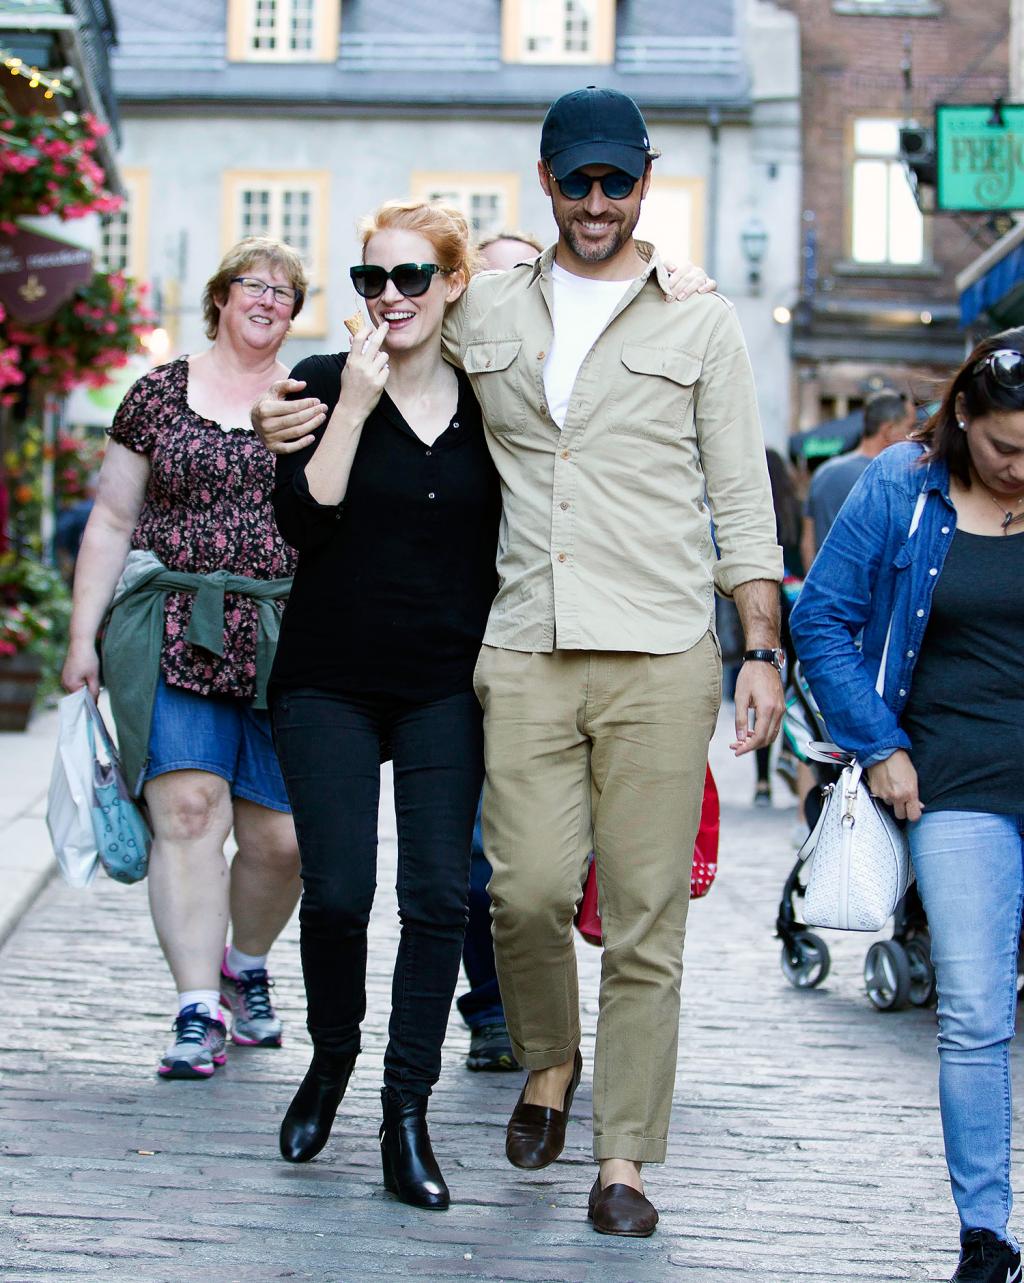 Newlywed Bliss! Jessica Chastain and Her Husband Look Happier than Ever in Quebec City